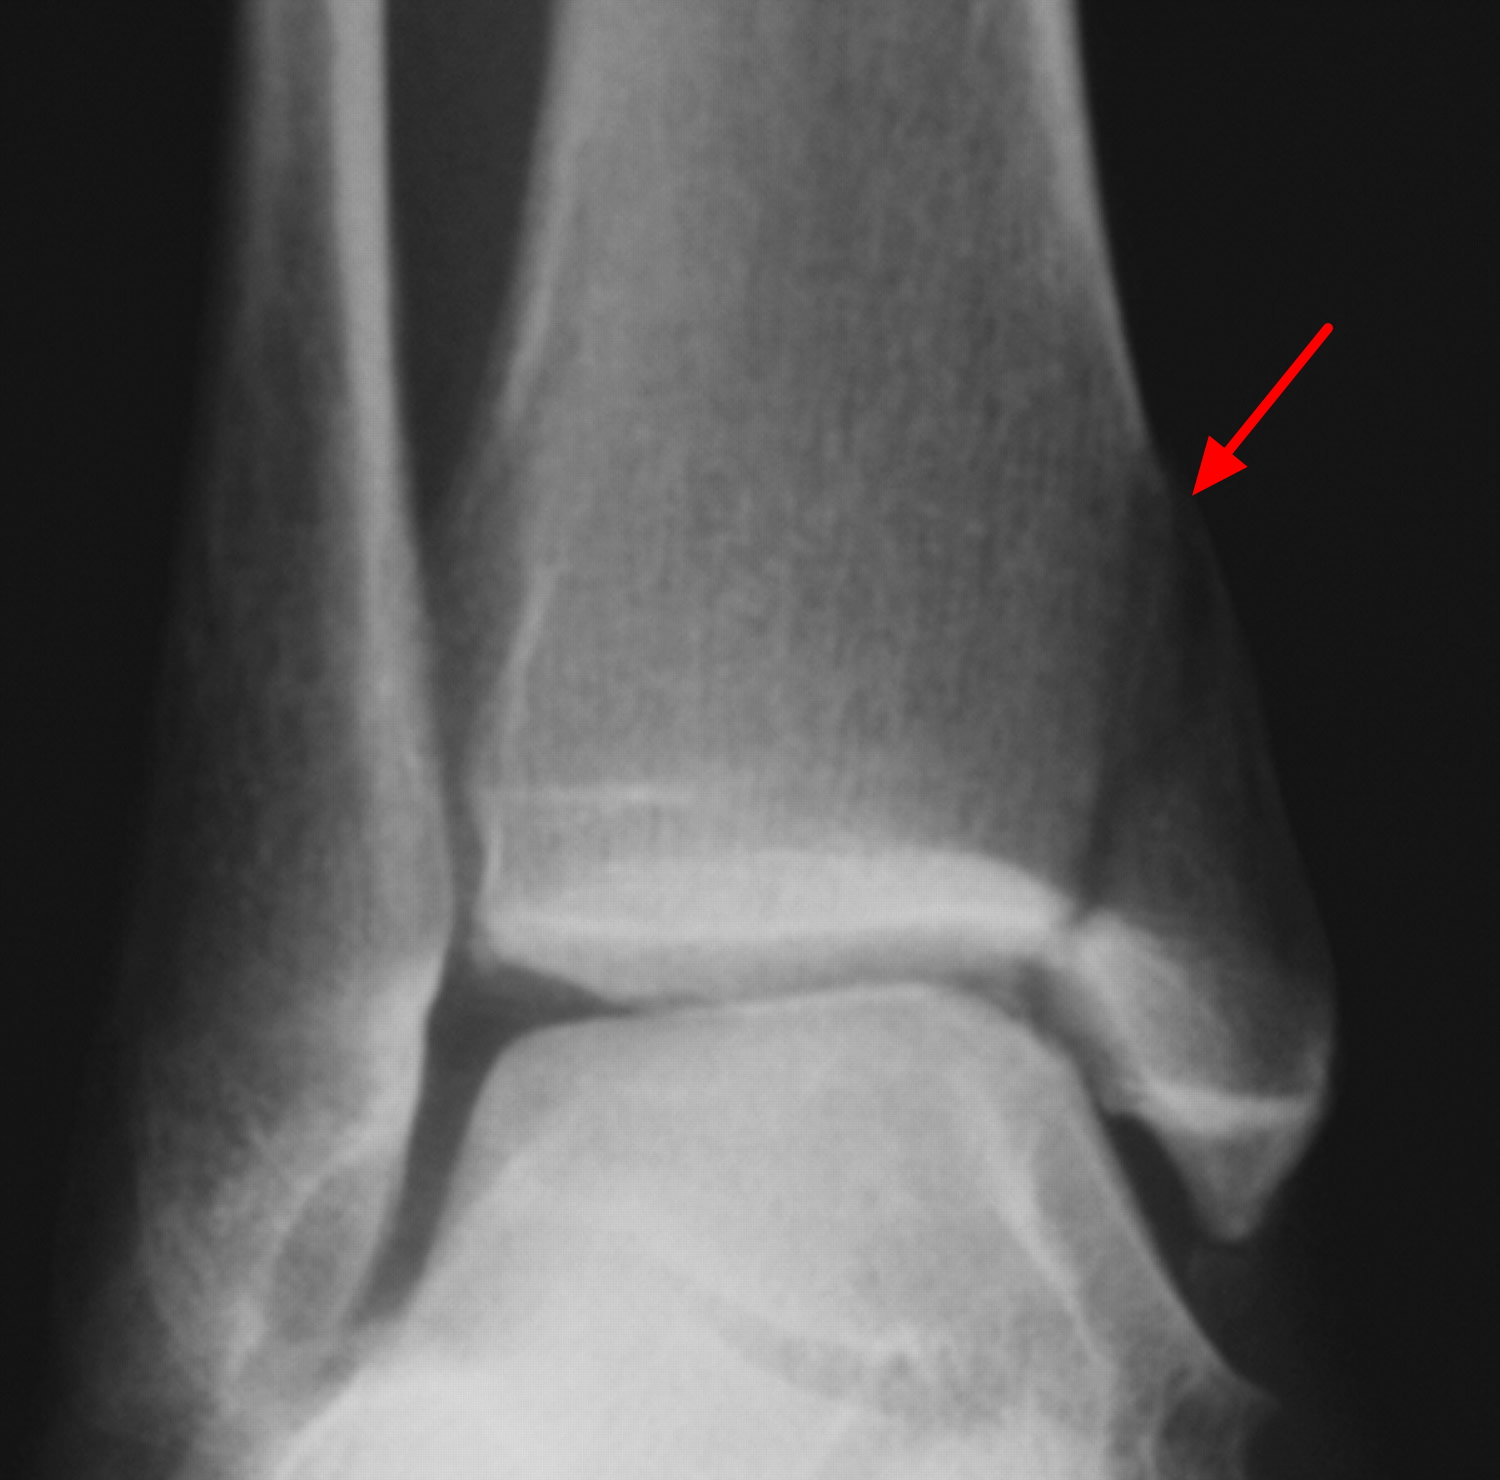 lateral malleolus fracture x ray